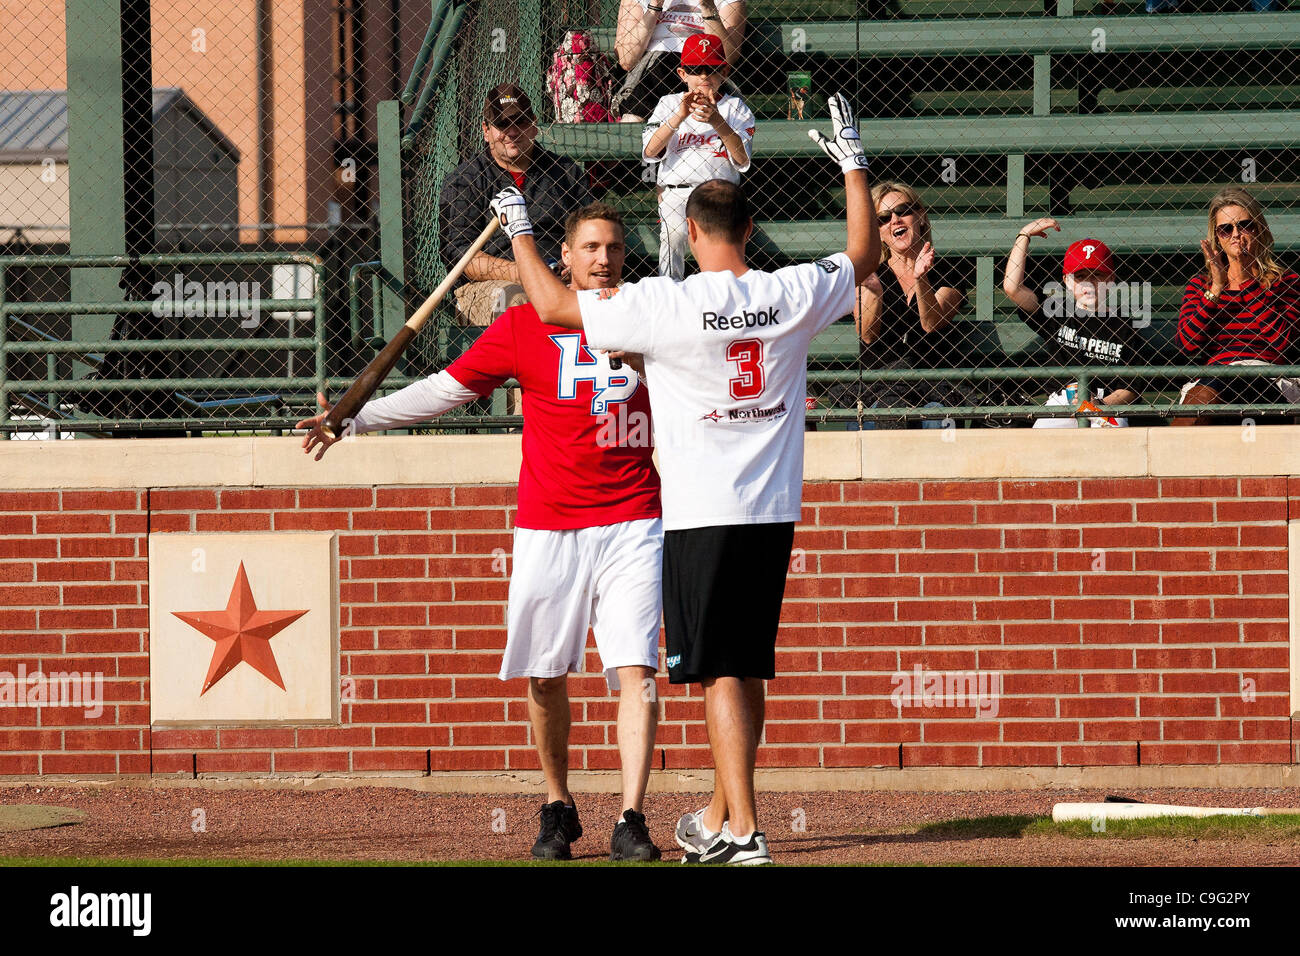 Dec. 18, 2011 - Houston, Texas, U.S - MLB Player Seth Overby P celebrates with Hunter Pence after hitting two home-runs in the home-run derby during the 3rd Annual Hunter Pence Baseball Camp at Baseball USA in Houston, TX. (Credit Image: © Juan DeLeon/Southcreek/ZUMAPRESS.com) Stock Photo